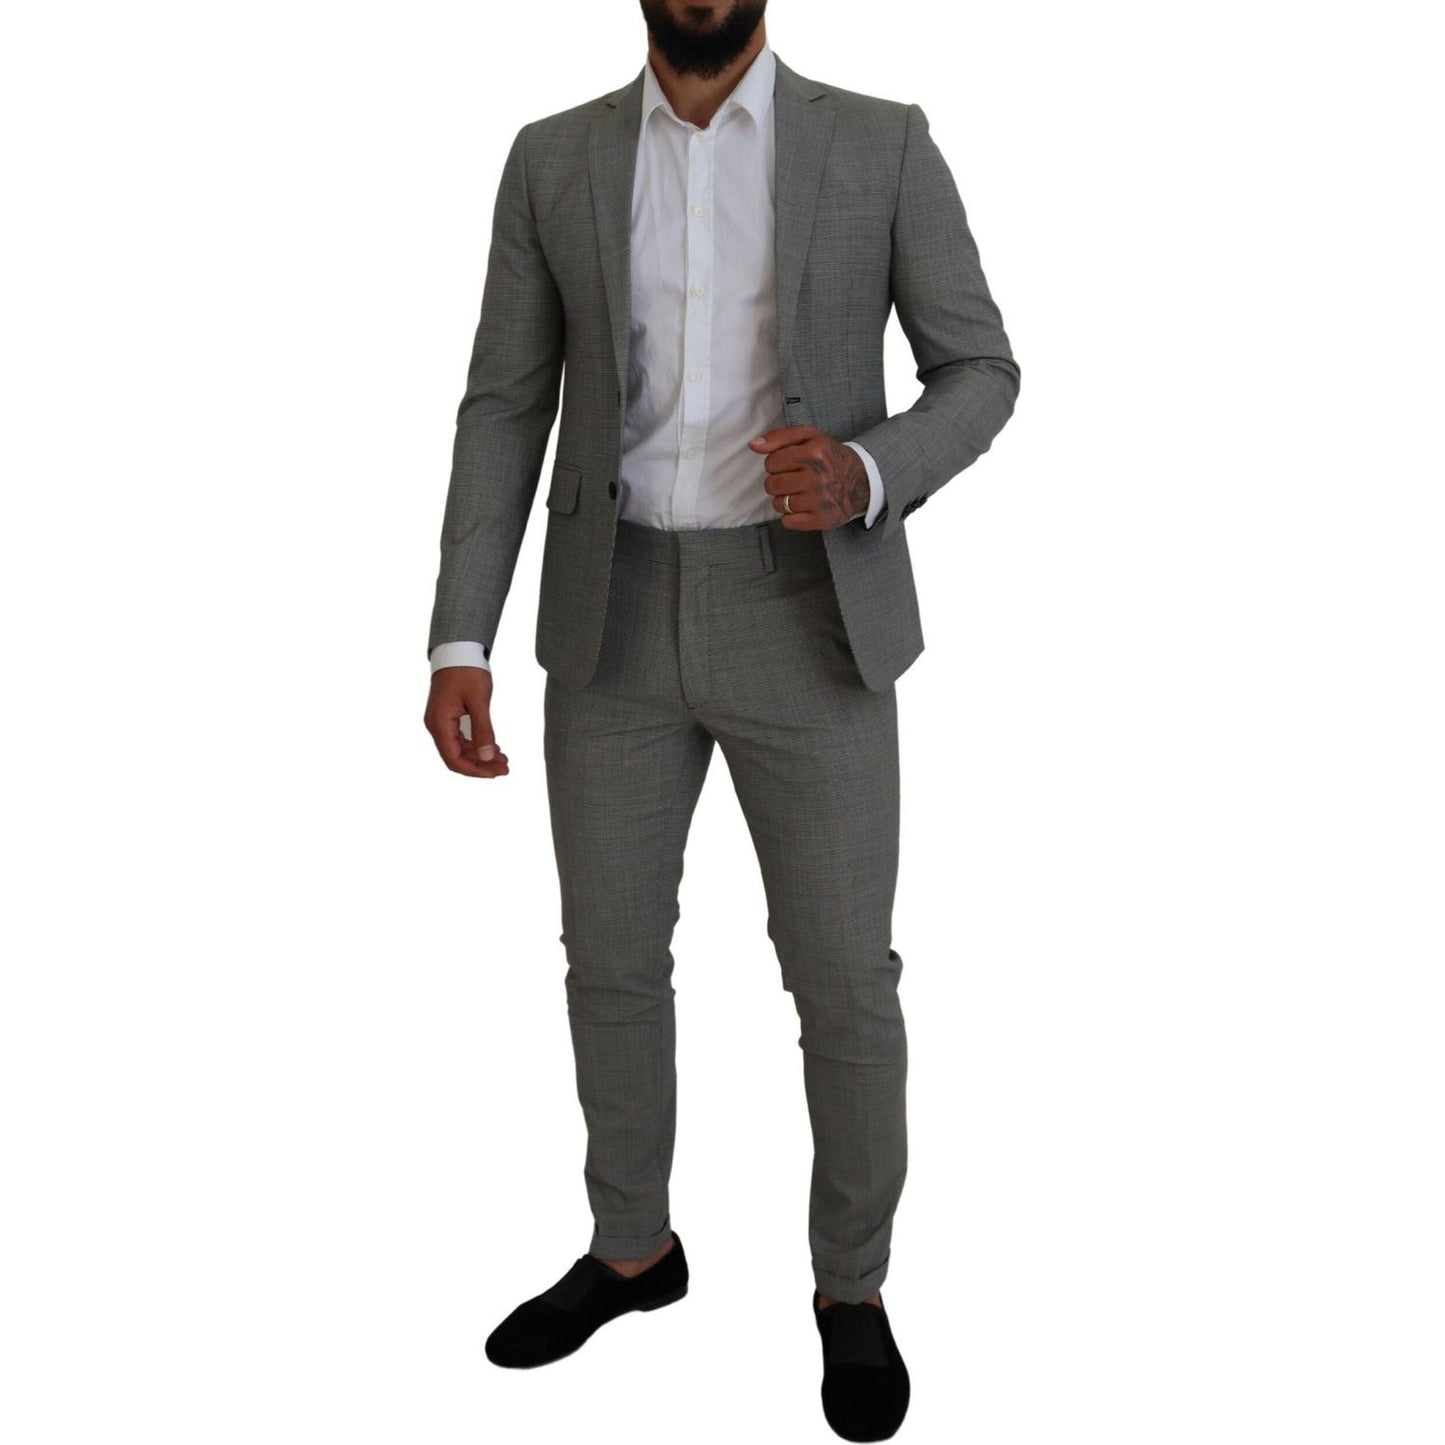 Dsquared² Gray Wool Single Breasted 2 Piece PARIS Suit gray-wool-single-breasted-2-piece-paris-suit